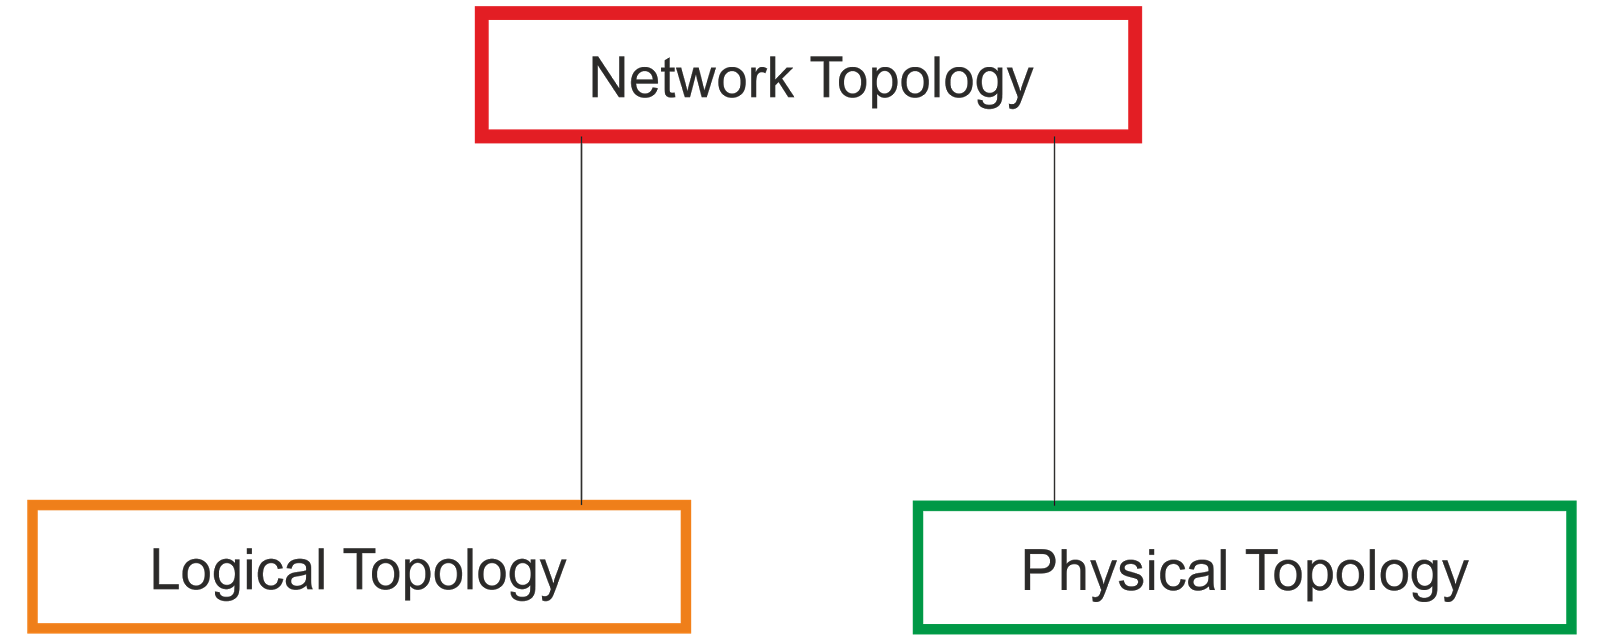 Network Topology & its Types - NetwaxLab